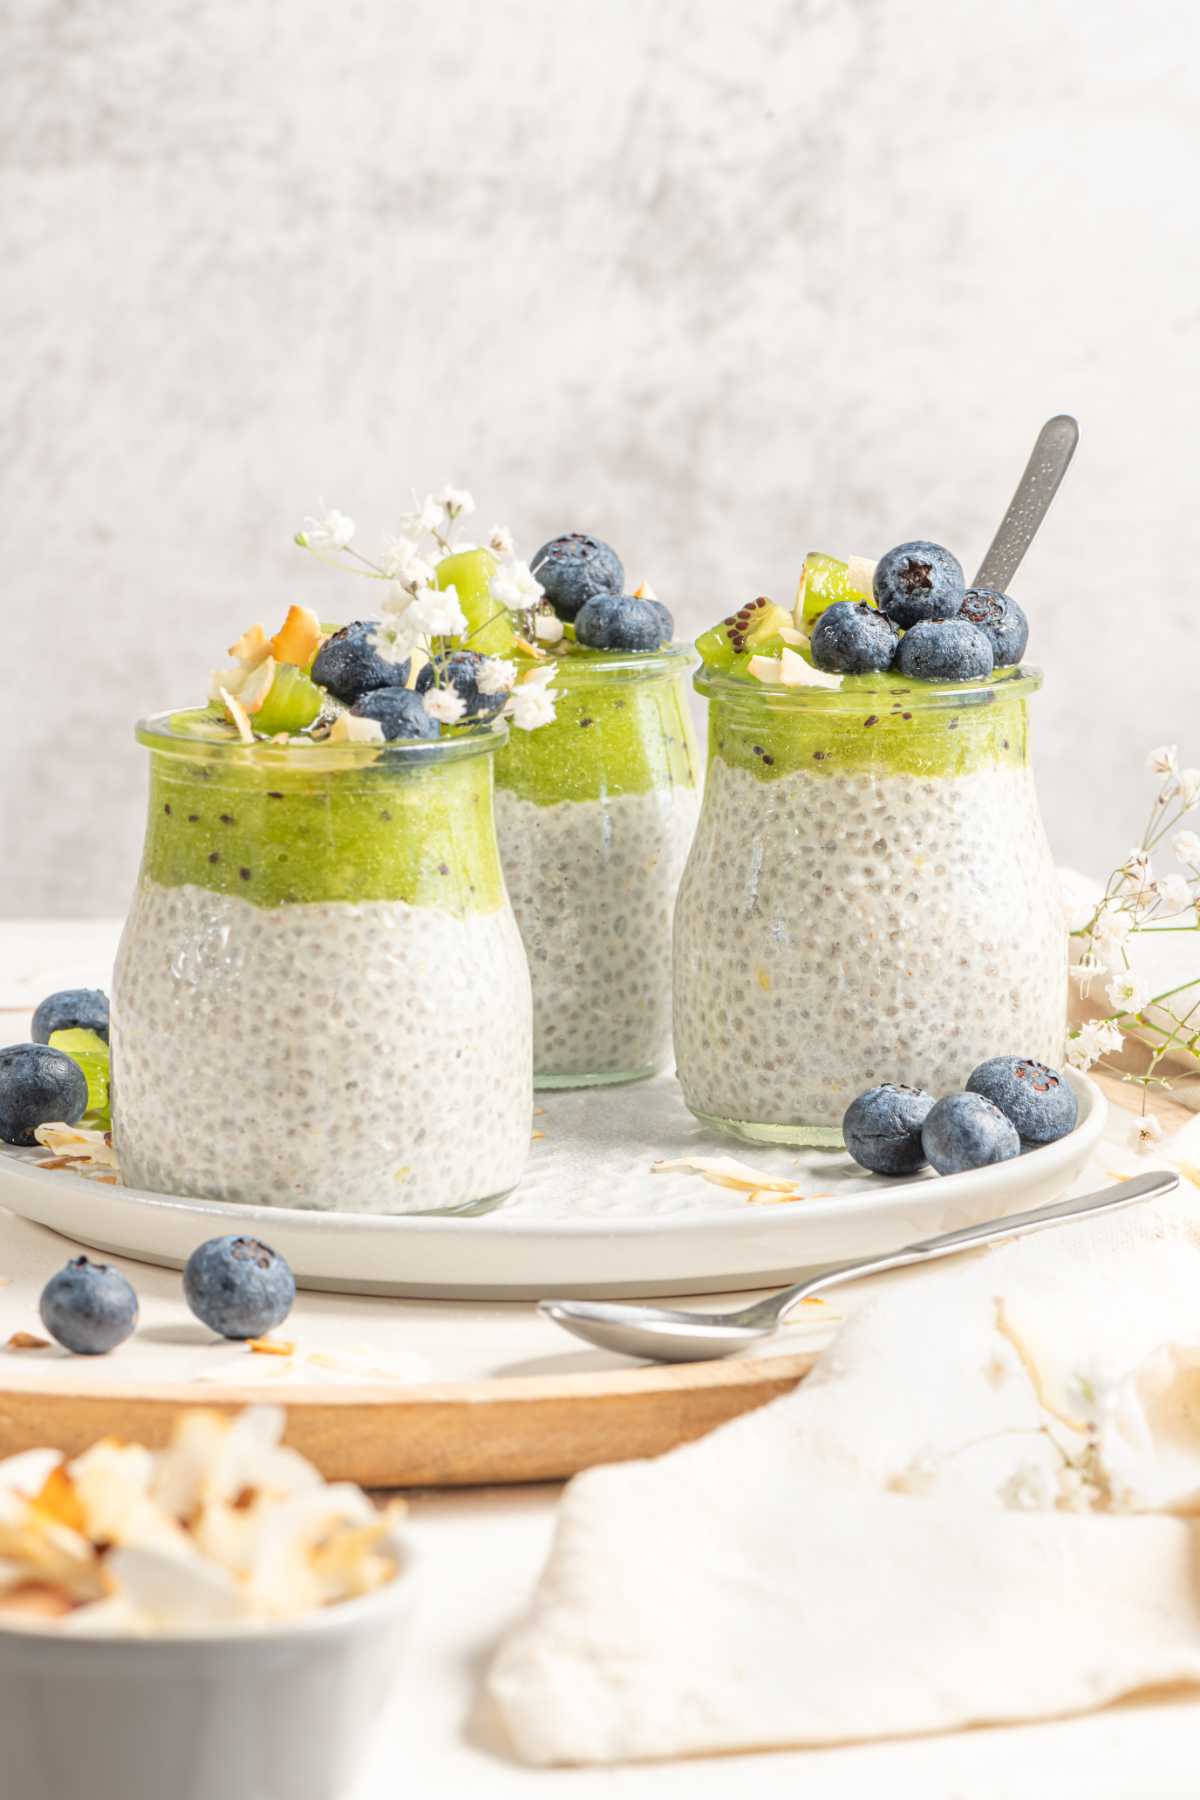 Healthy breakfast chia pudding with kiwi, blueberries and coconut